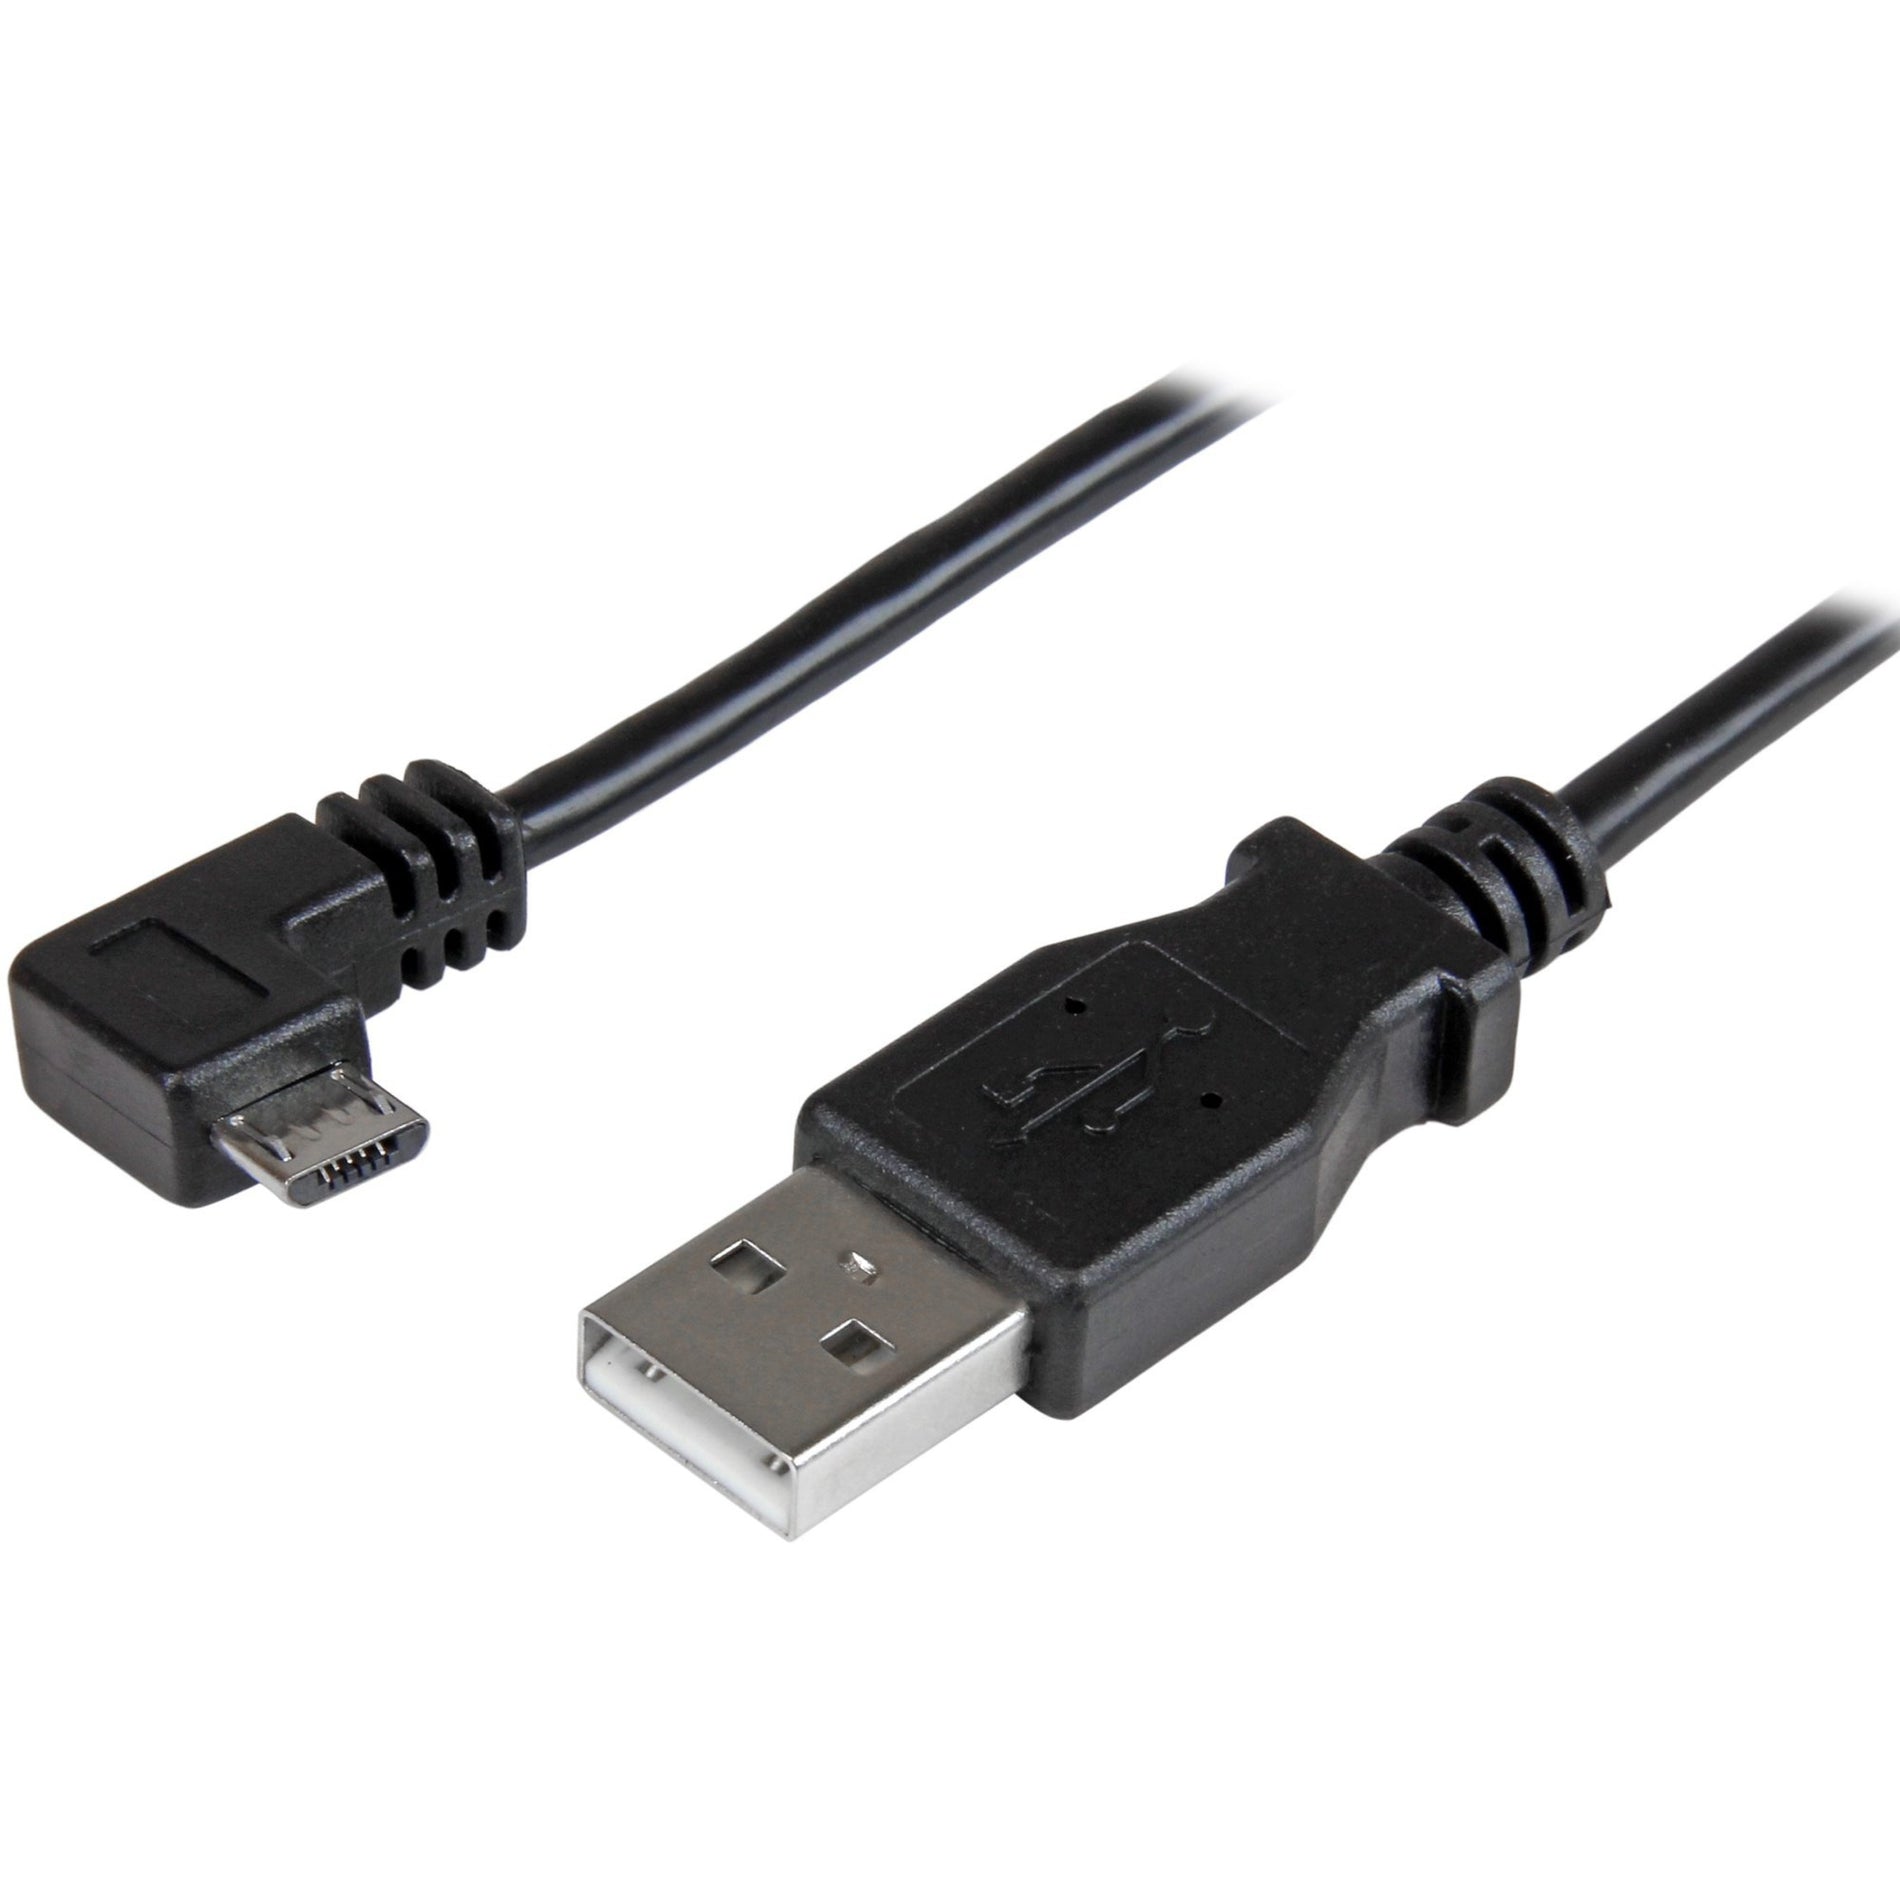 StarTech.com USBAUB1MRA 1m Right-Angle Micro-USB 2.0 Charging Cable, 3.28 ft, Black